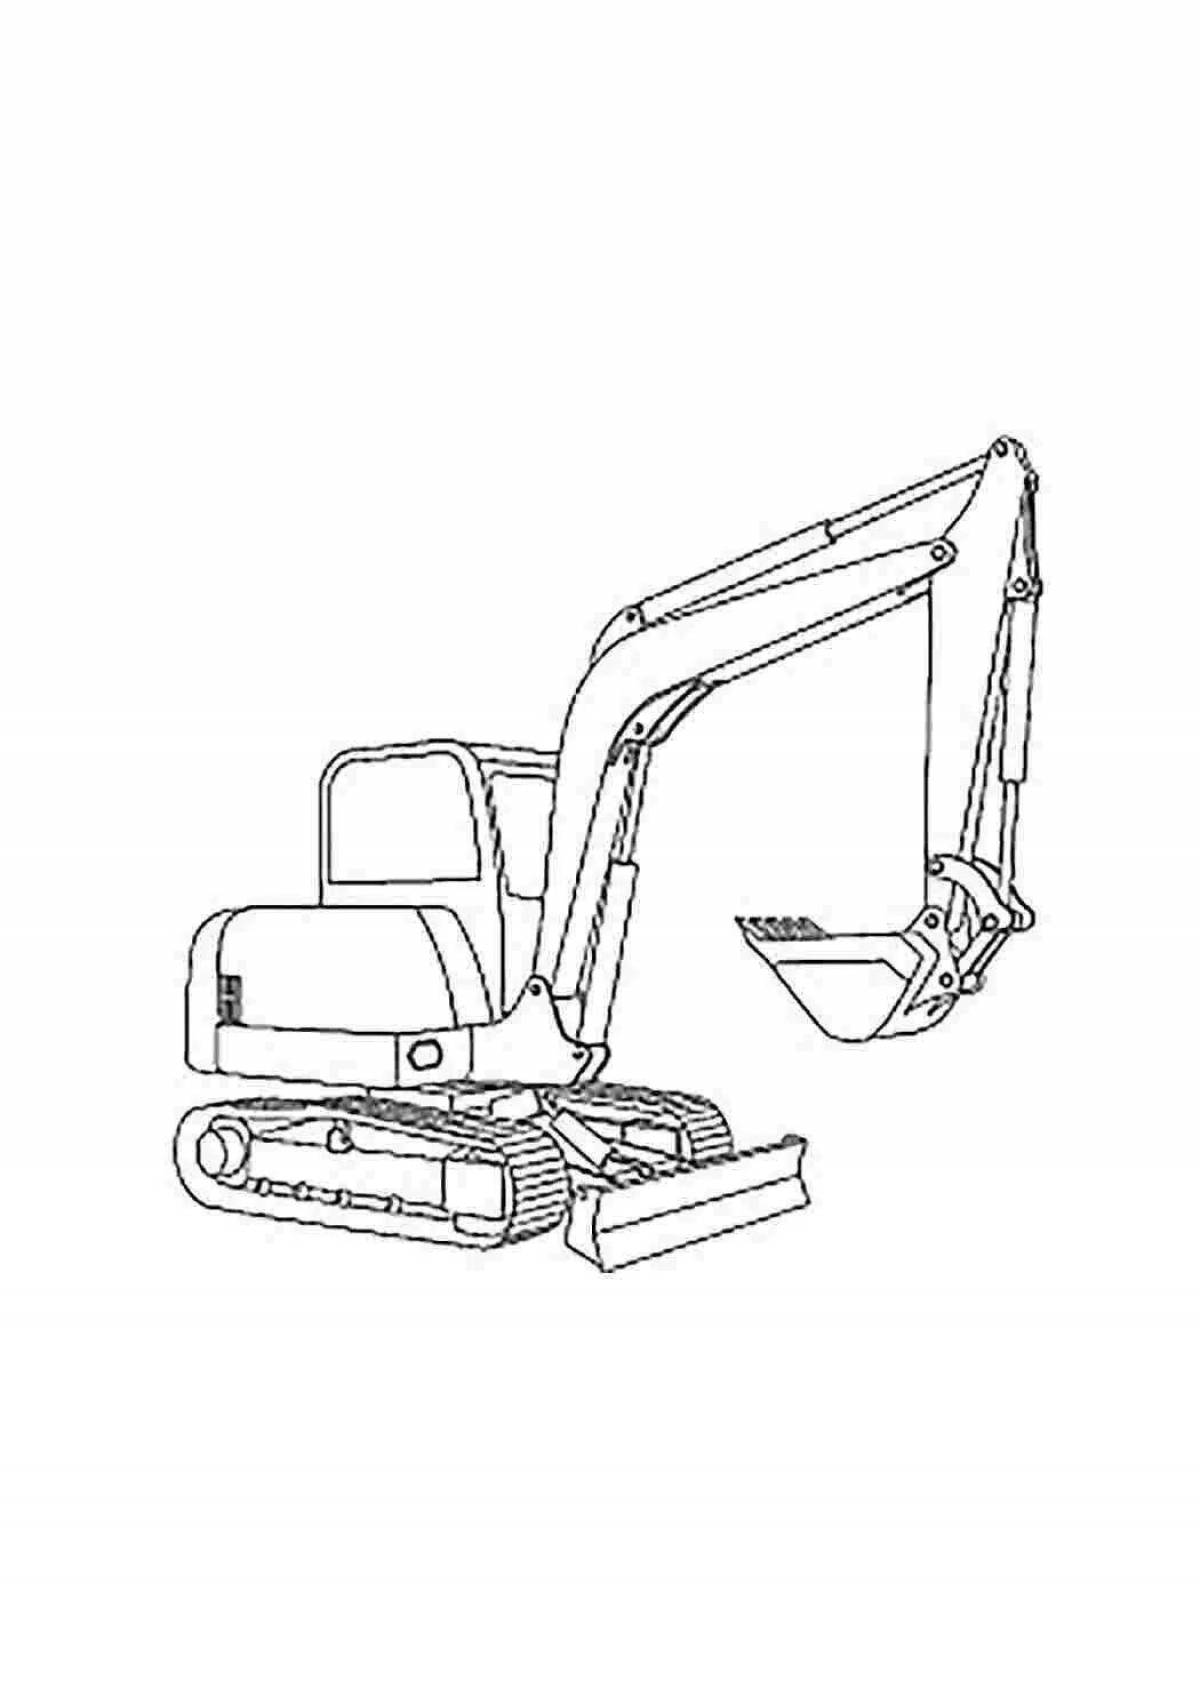 Bold excavator coloring book for boys